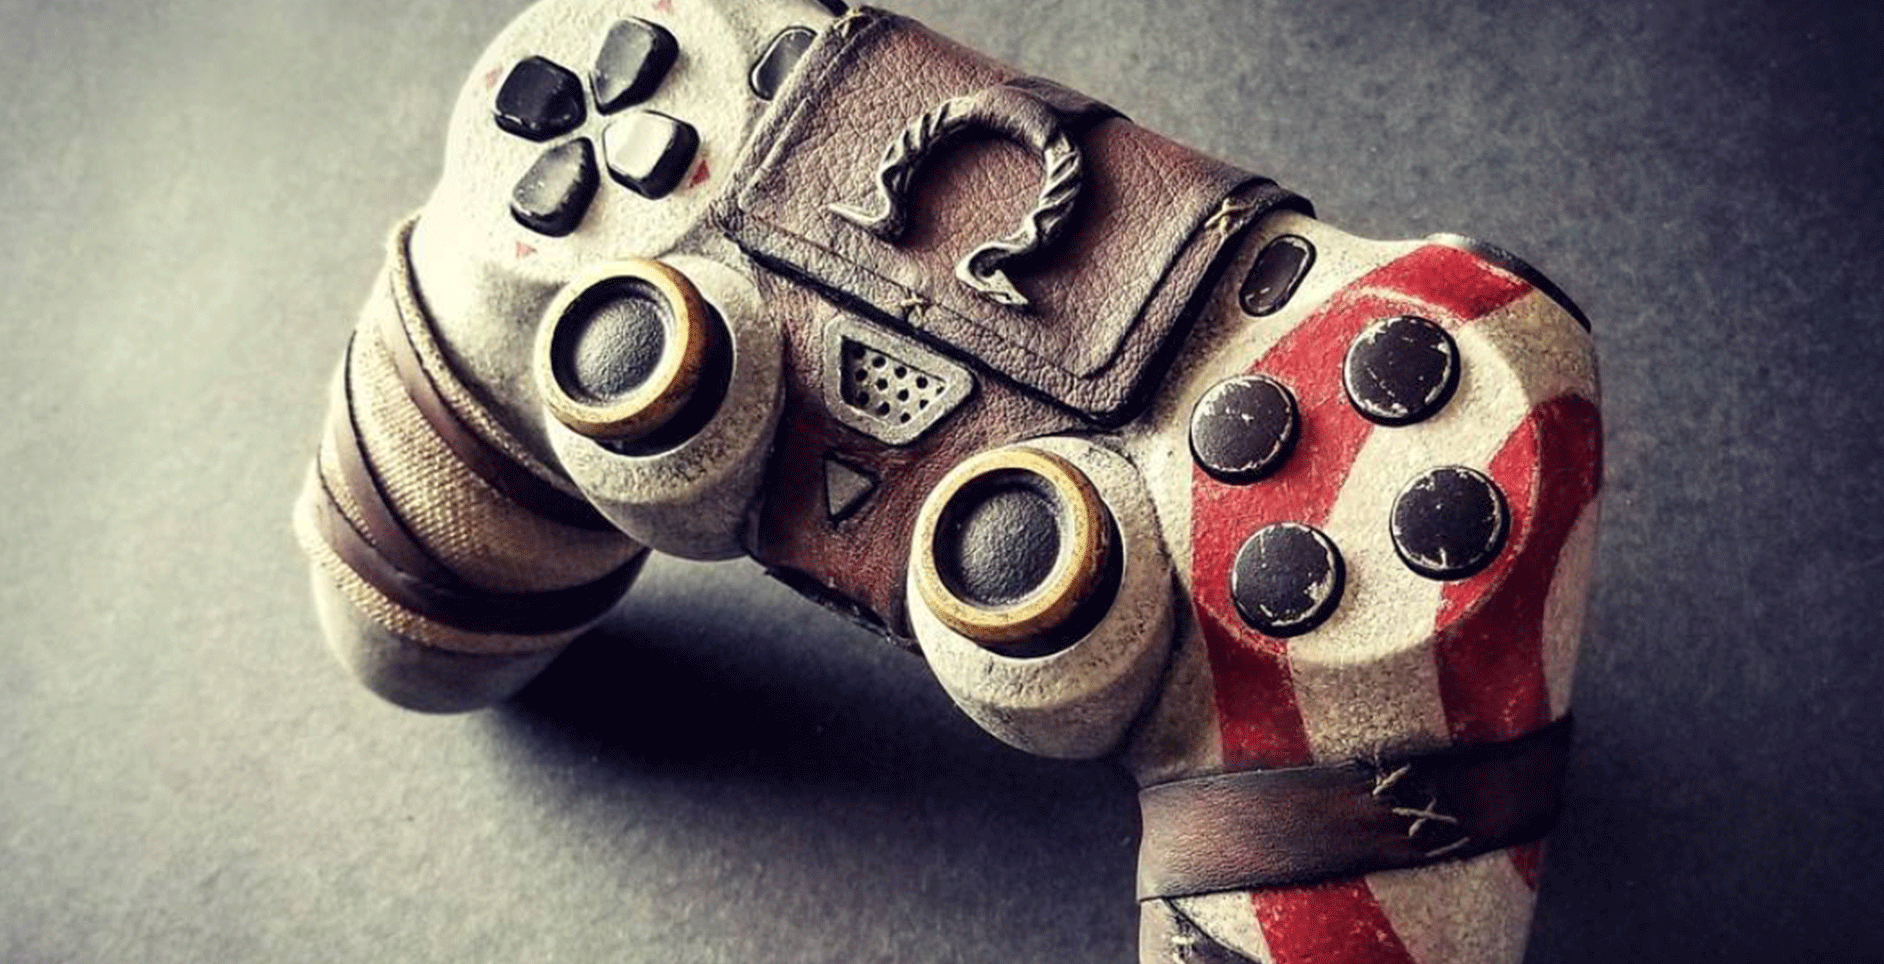 gow ps4 controller